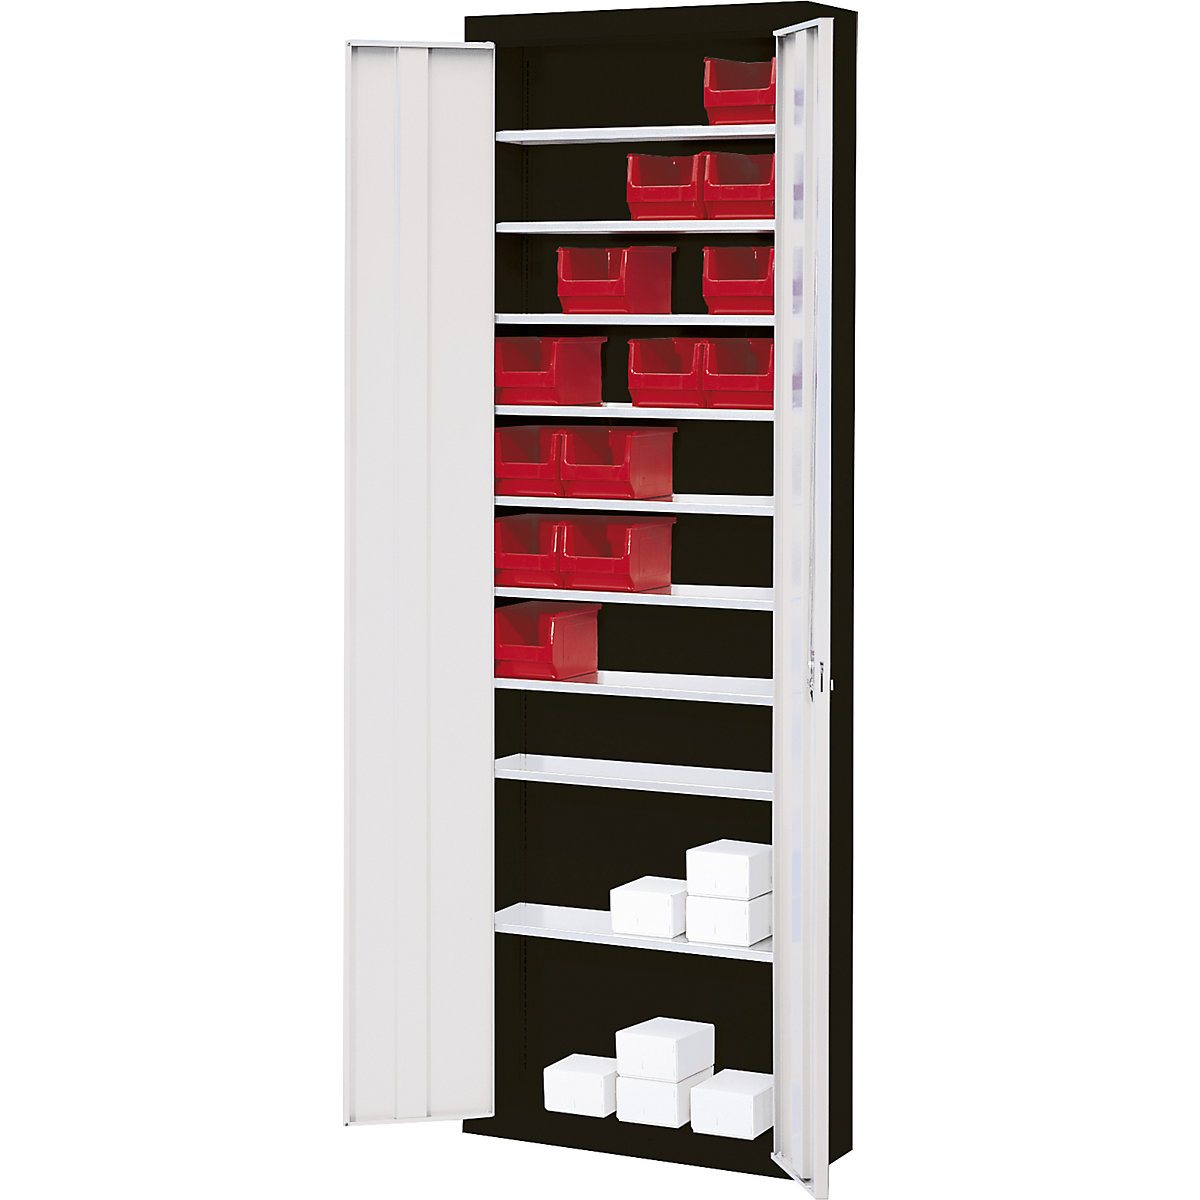 Storage cupboard, without open fronted storage bins – mauser